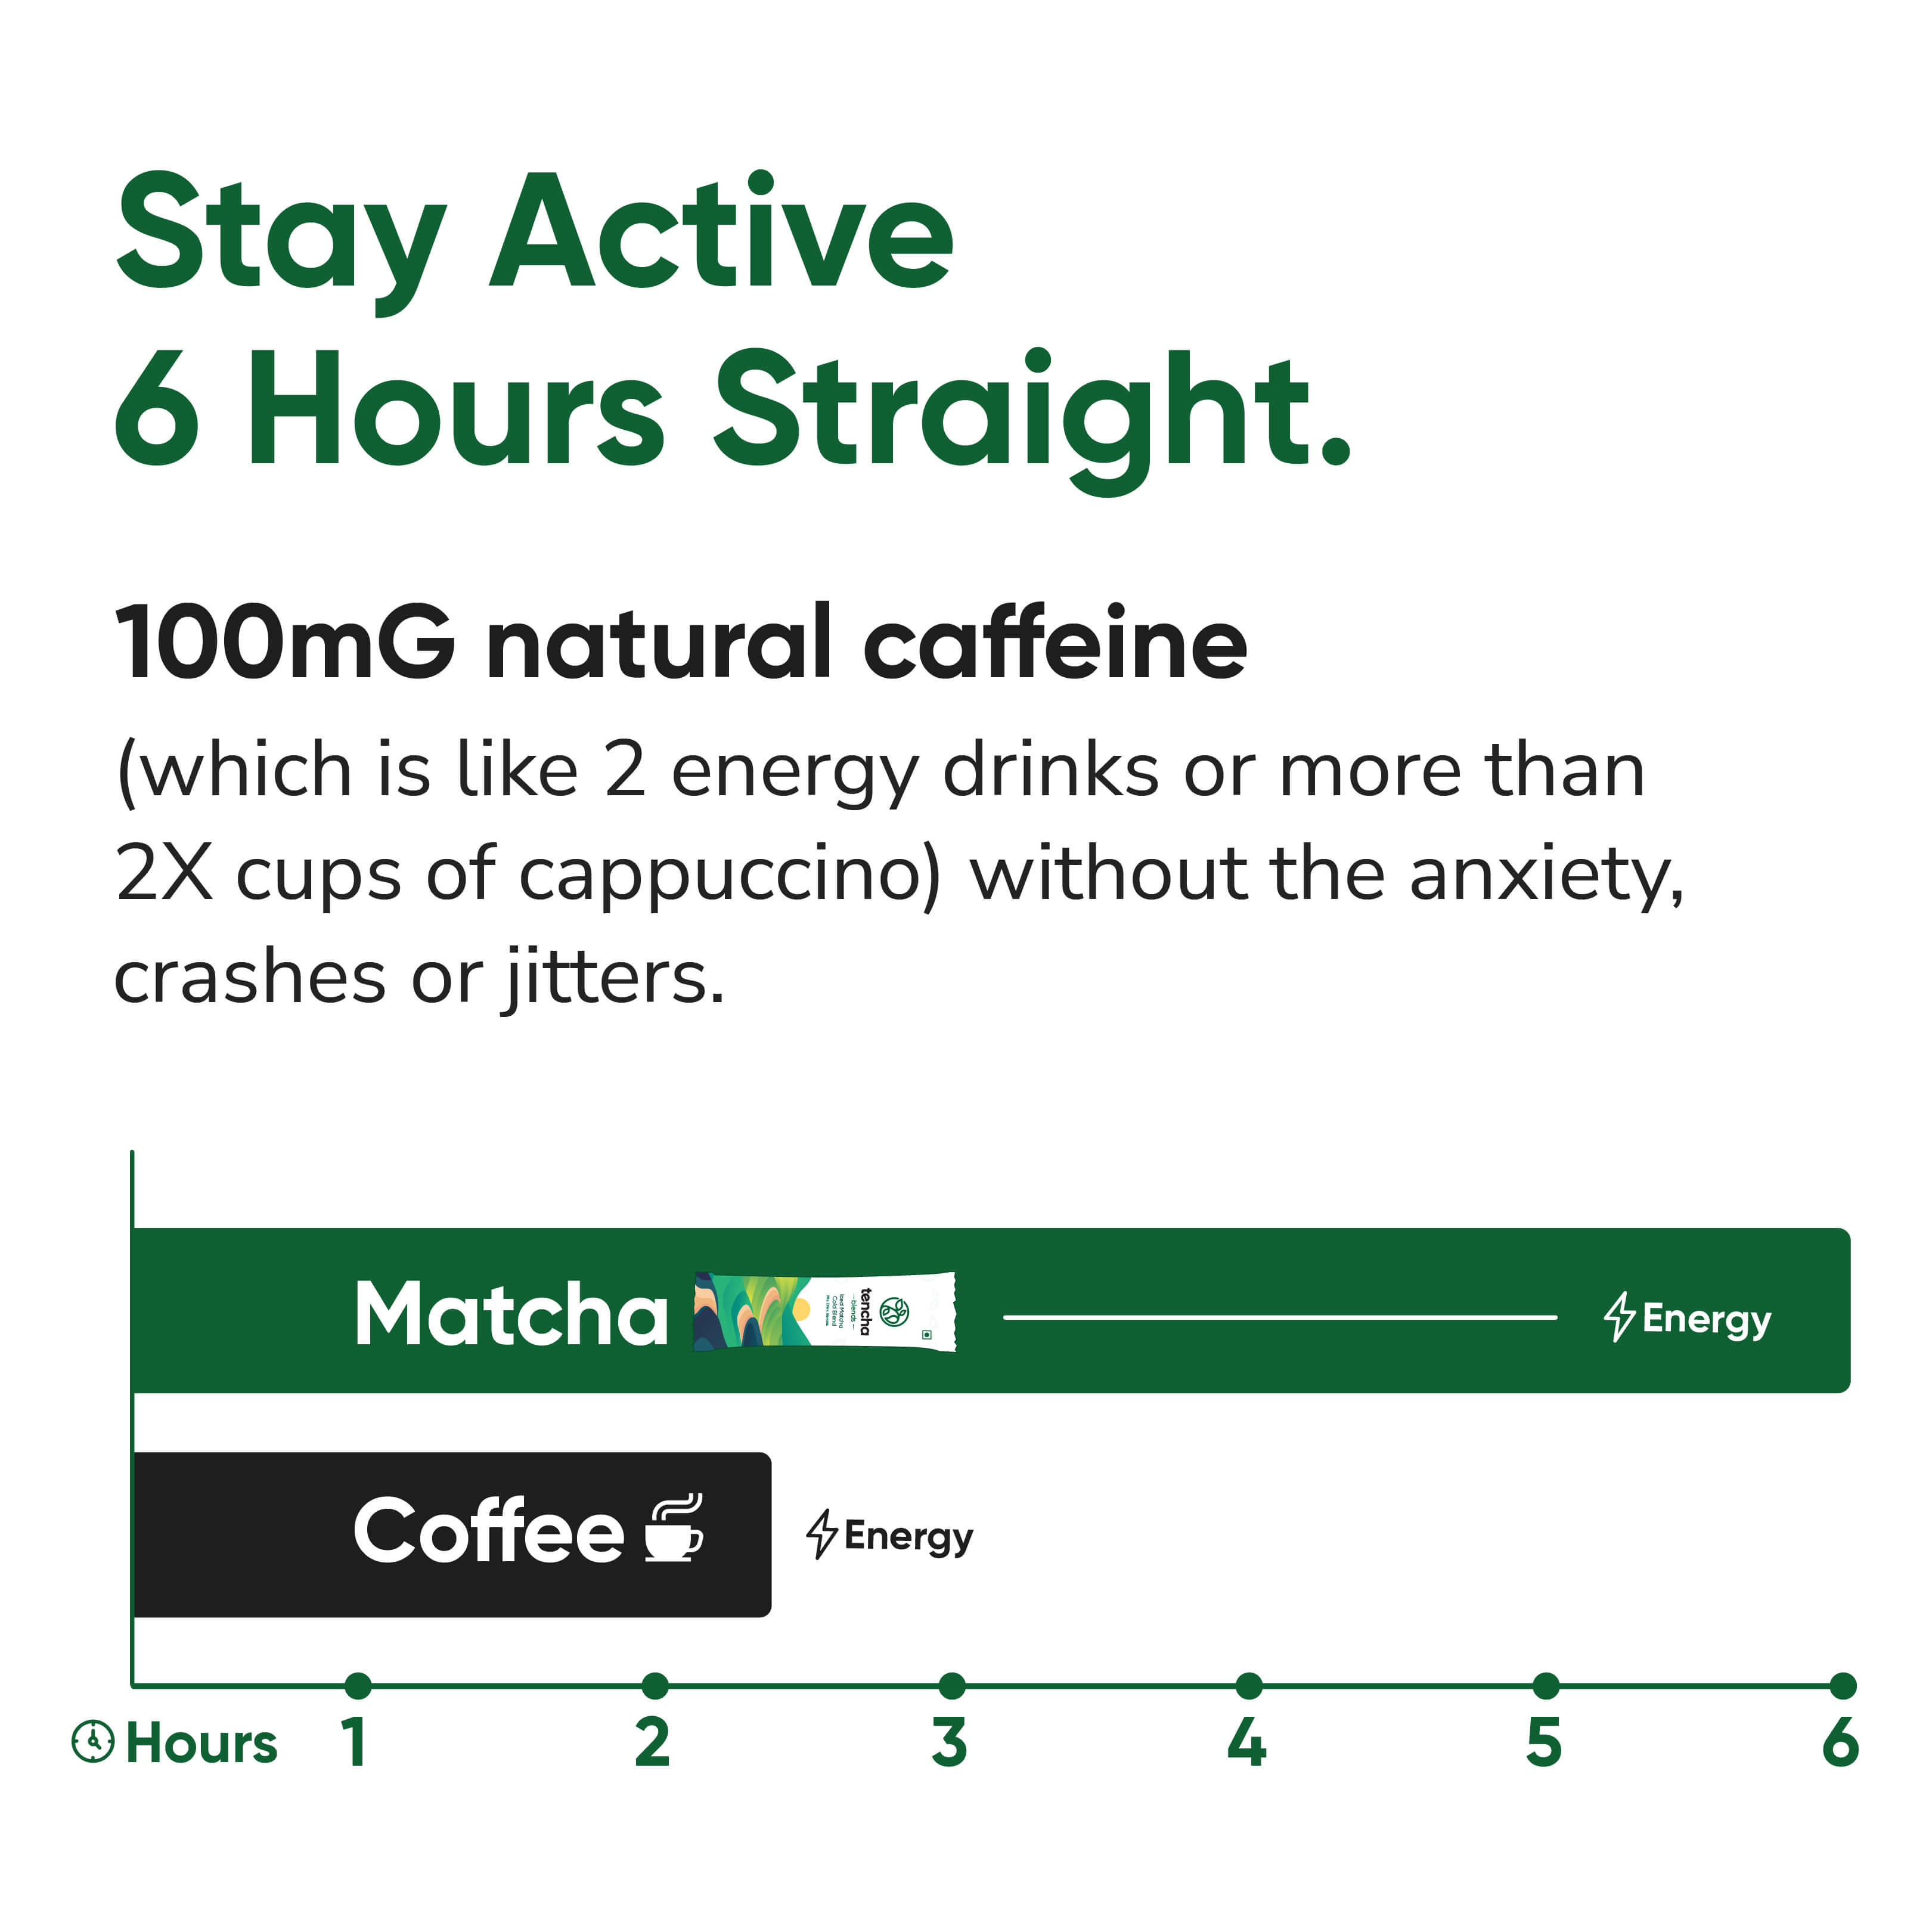 caffeine in Iced Matcha by Tencha which makes you active for 6 hours